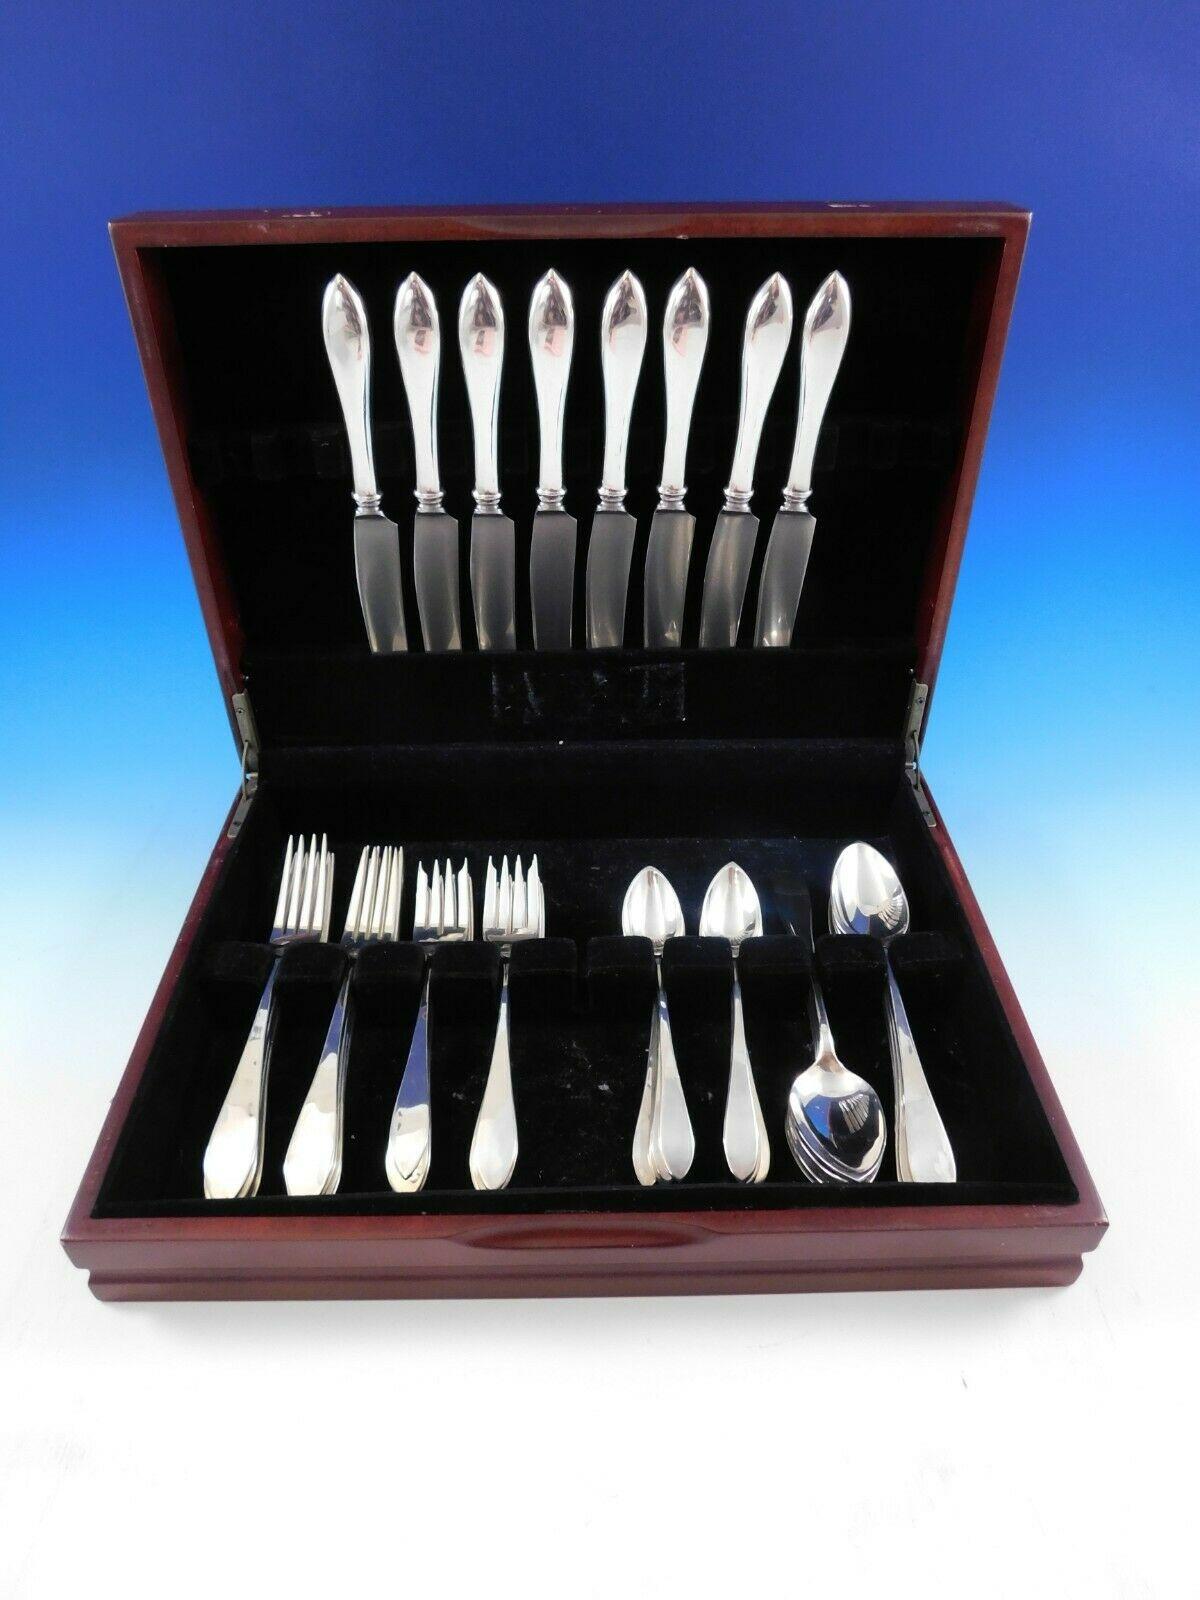 Old Newbury Crafters silver is genuinely handmade and heavy, the machine cannot match the quality, durability, look and feel of handmade silver.

Rare dinner size Old Newbury by Old Newbury Crafters sterling silver flatware set - 40 pieces. This set